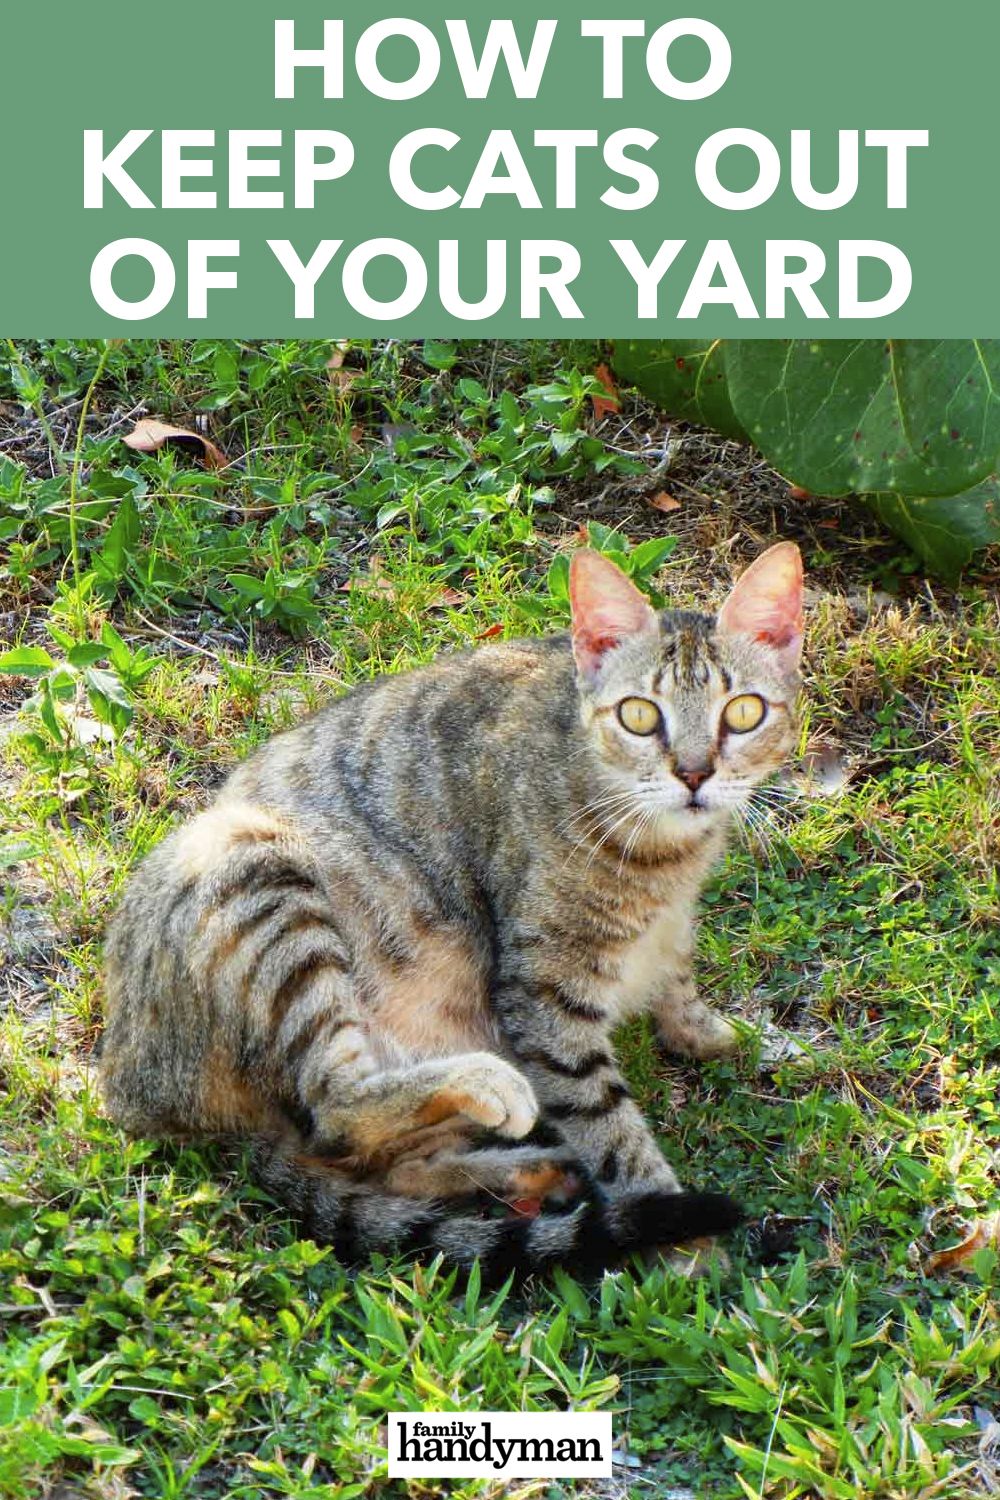 How to Keep Cats Out of Your Yard